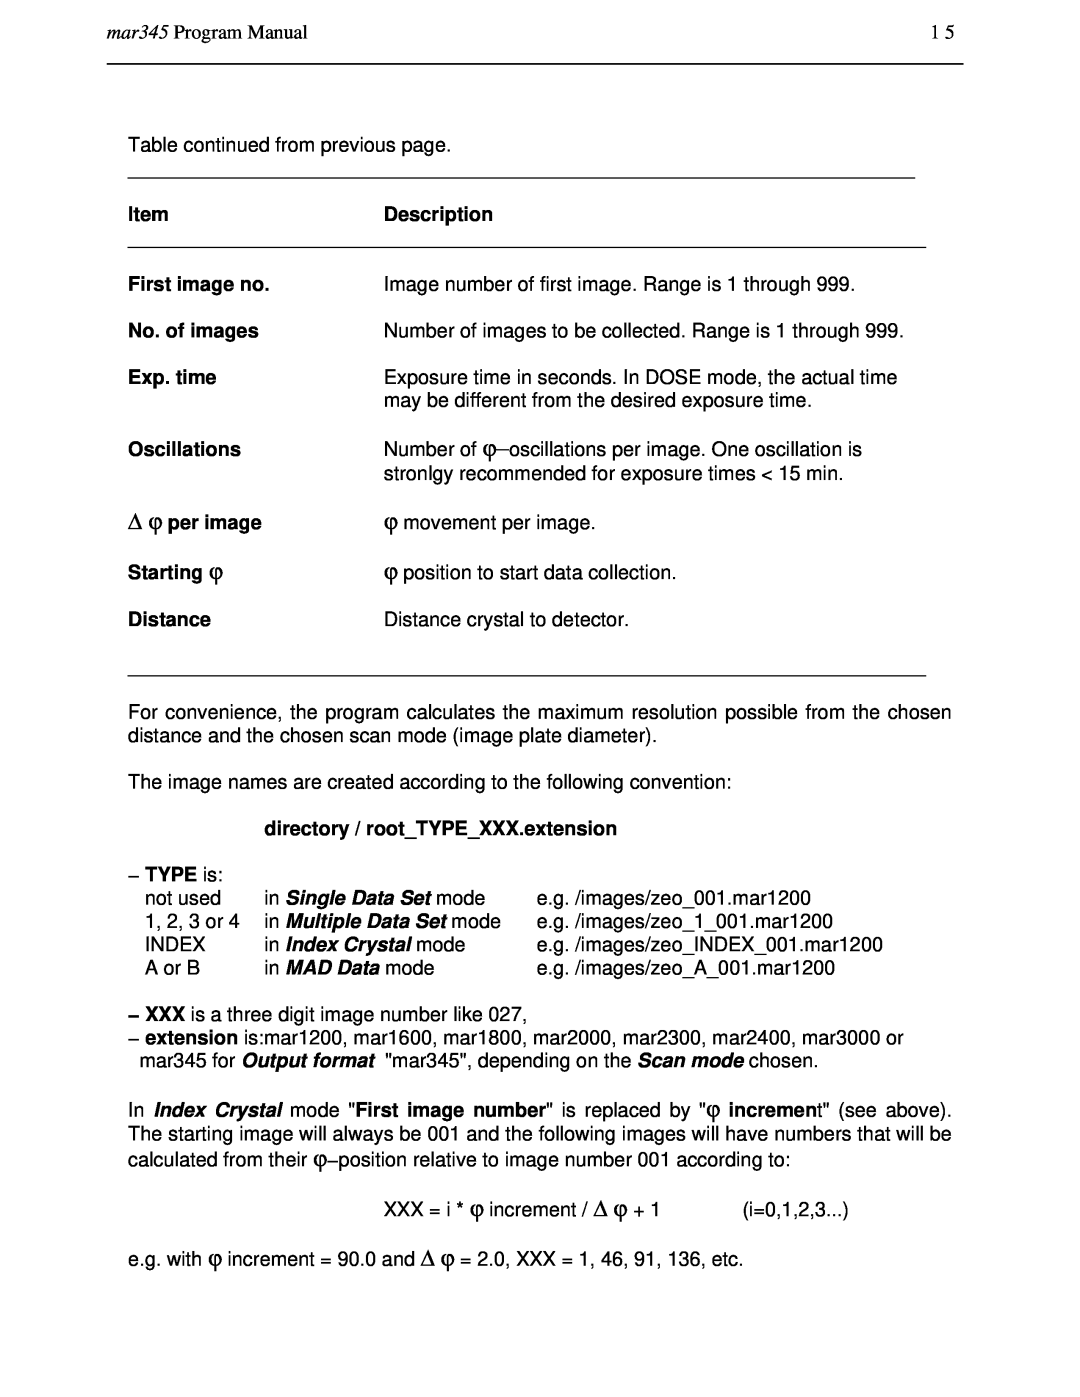 Compaq manual in Index Crystal mode, in MAD Data mode, mar345 Program Manual 